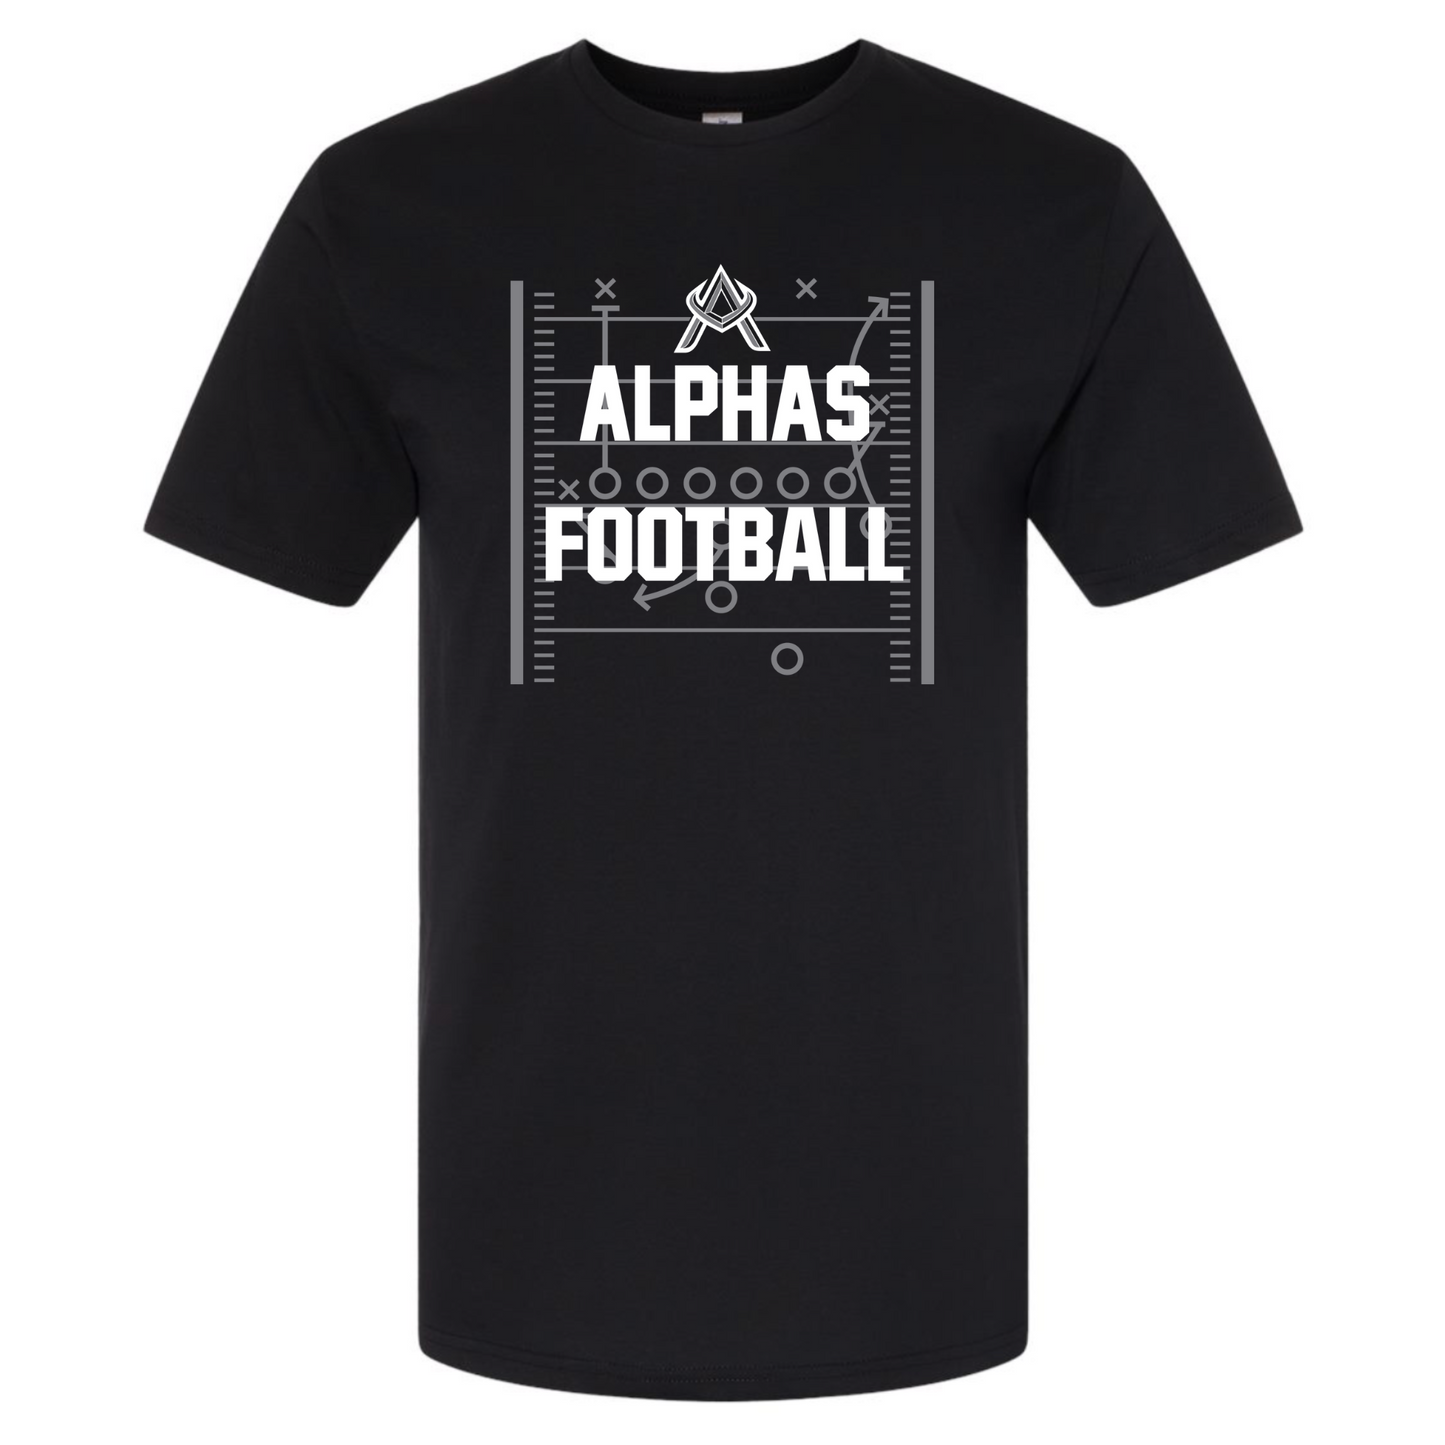 Alphas Football T-Shirt (Adult & Youth)